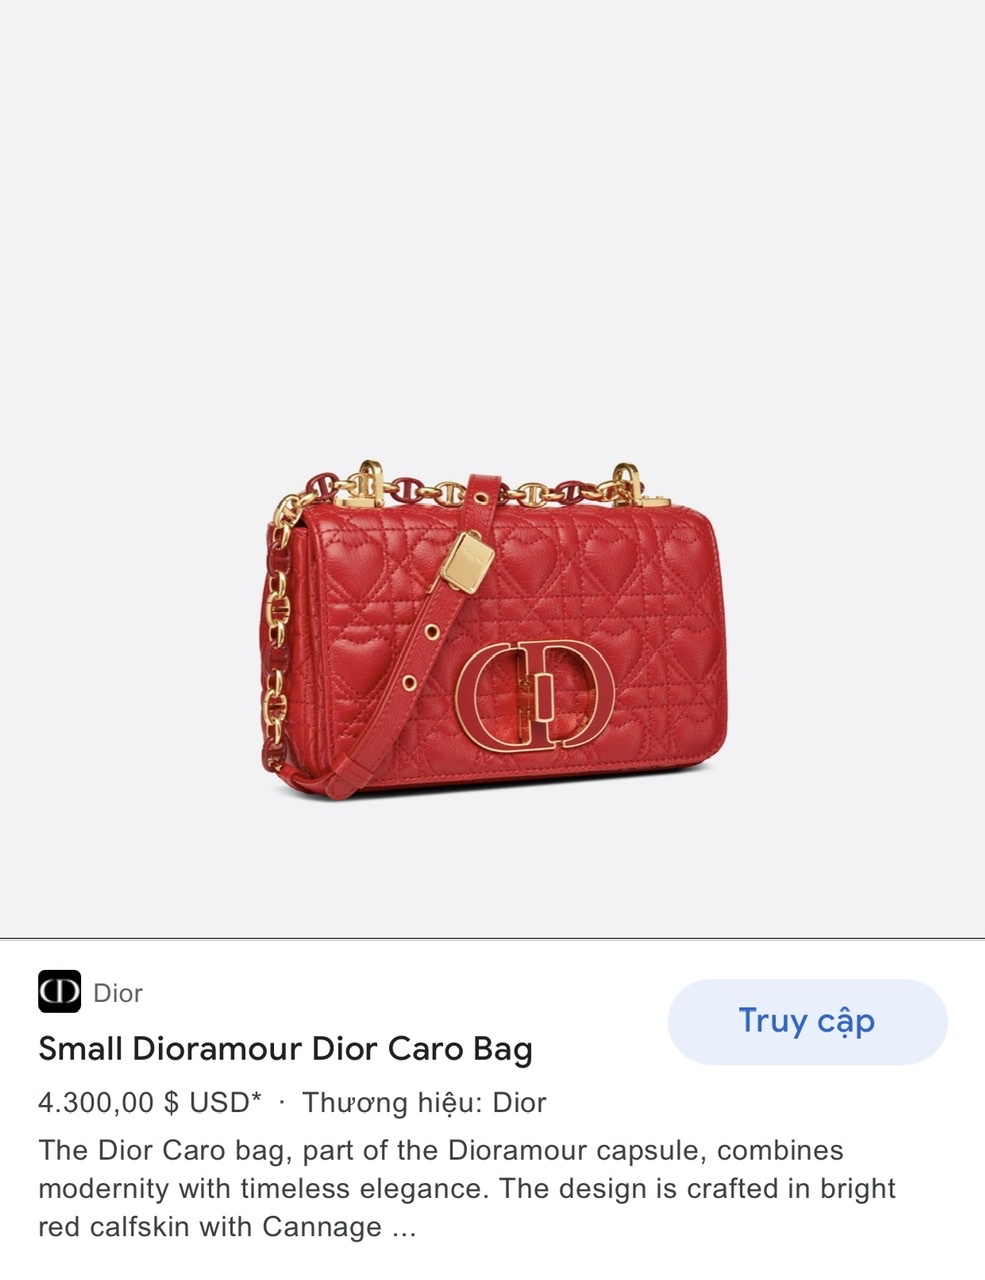 Small Dioramour White Lady Dior  AWL1780  LuxuryPromise